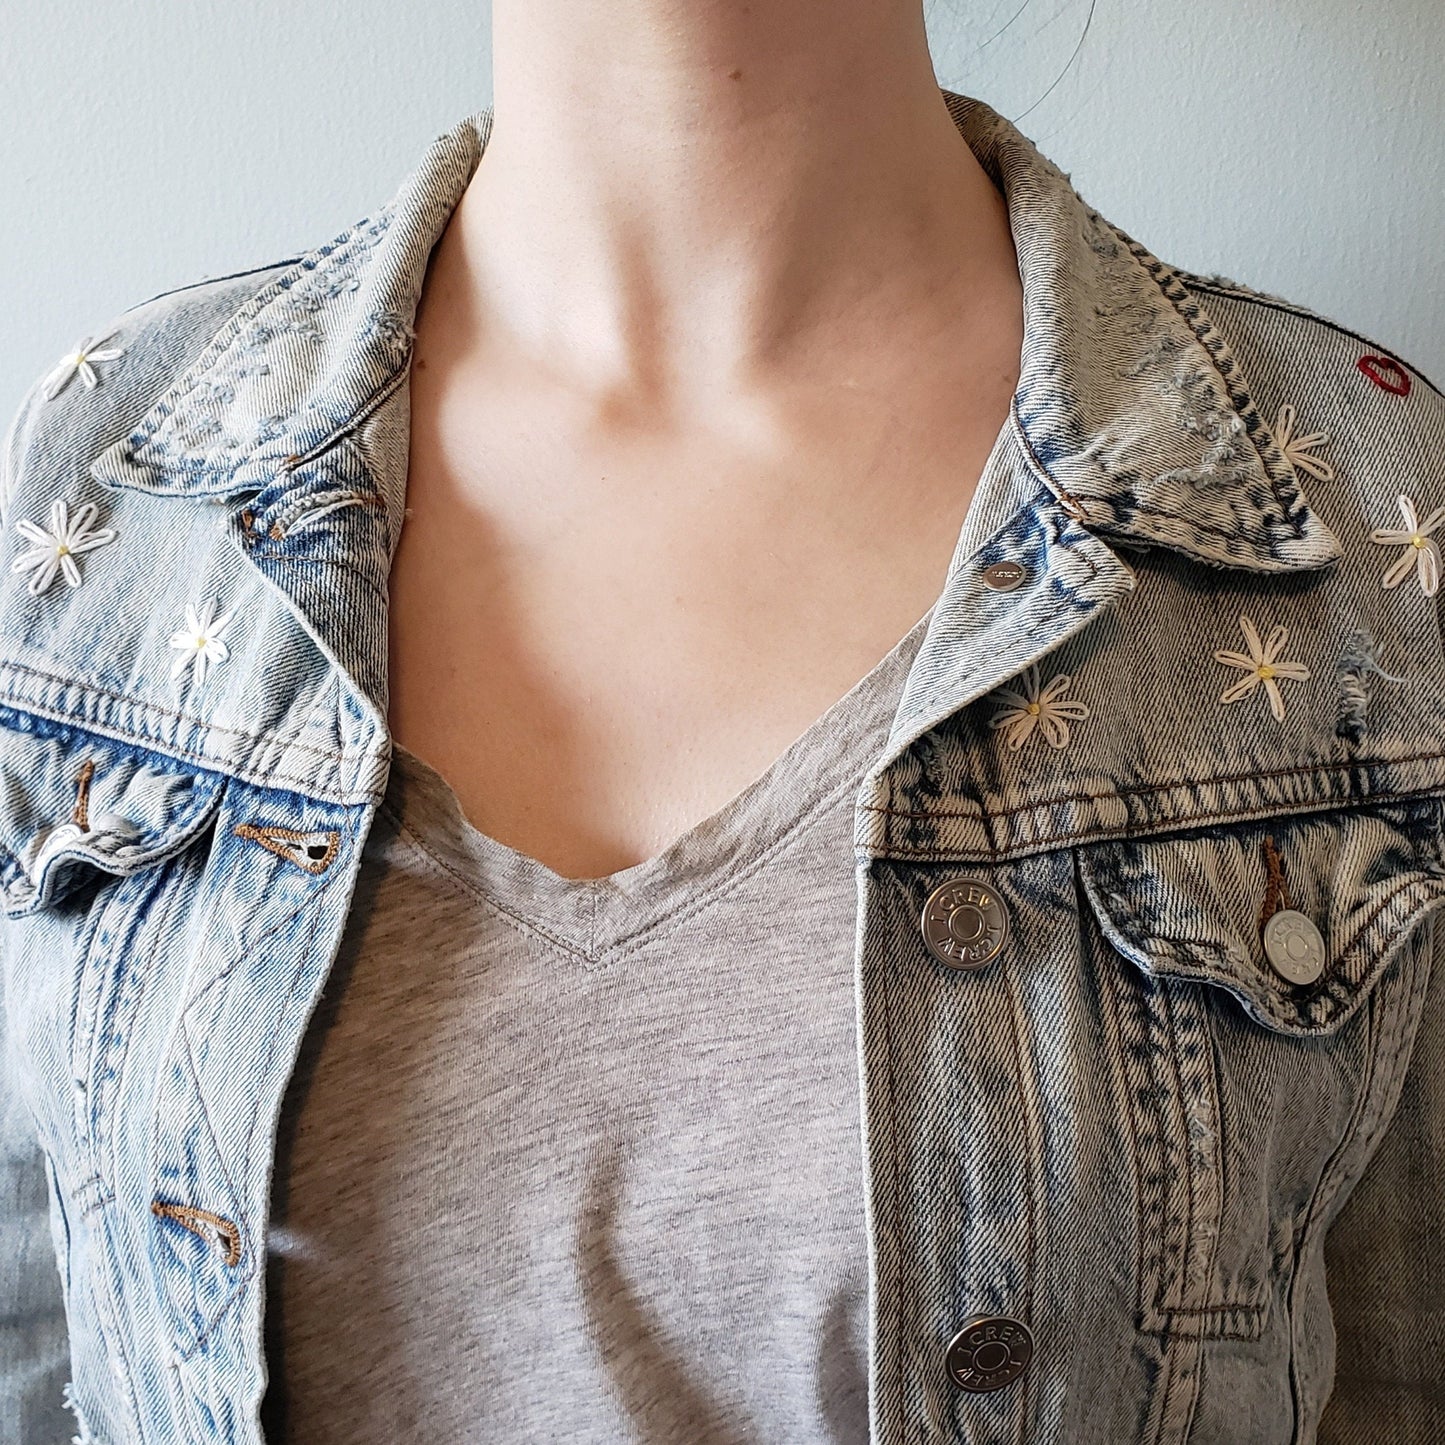 A close up shot of the jean jacket, worn by a woman. We can see that there are at least 4 daisies visible on each shoulder when the collar is down. The daisies are about an inch across and have about 6 petals each. The jacket is worn open and relaxed.